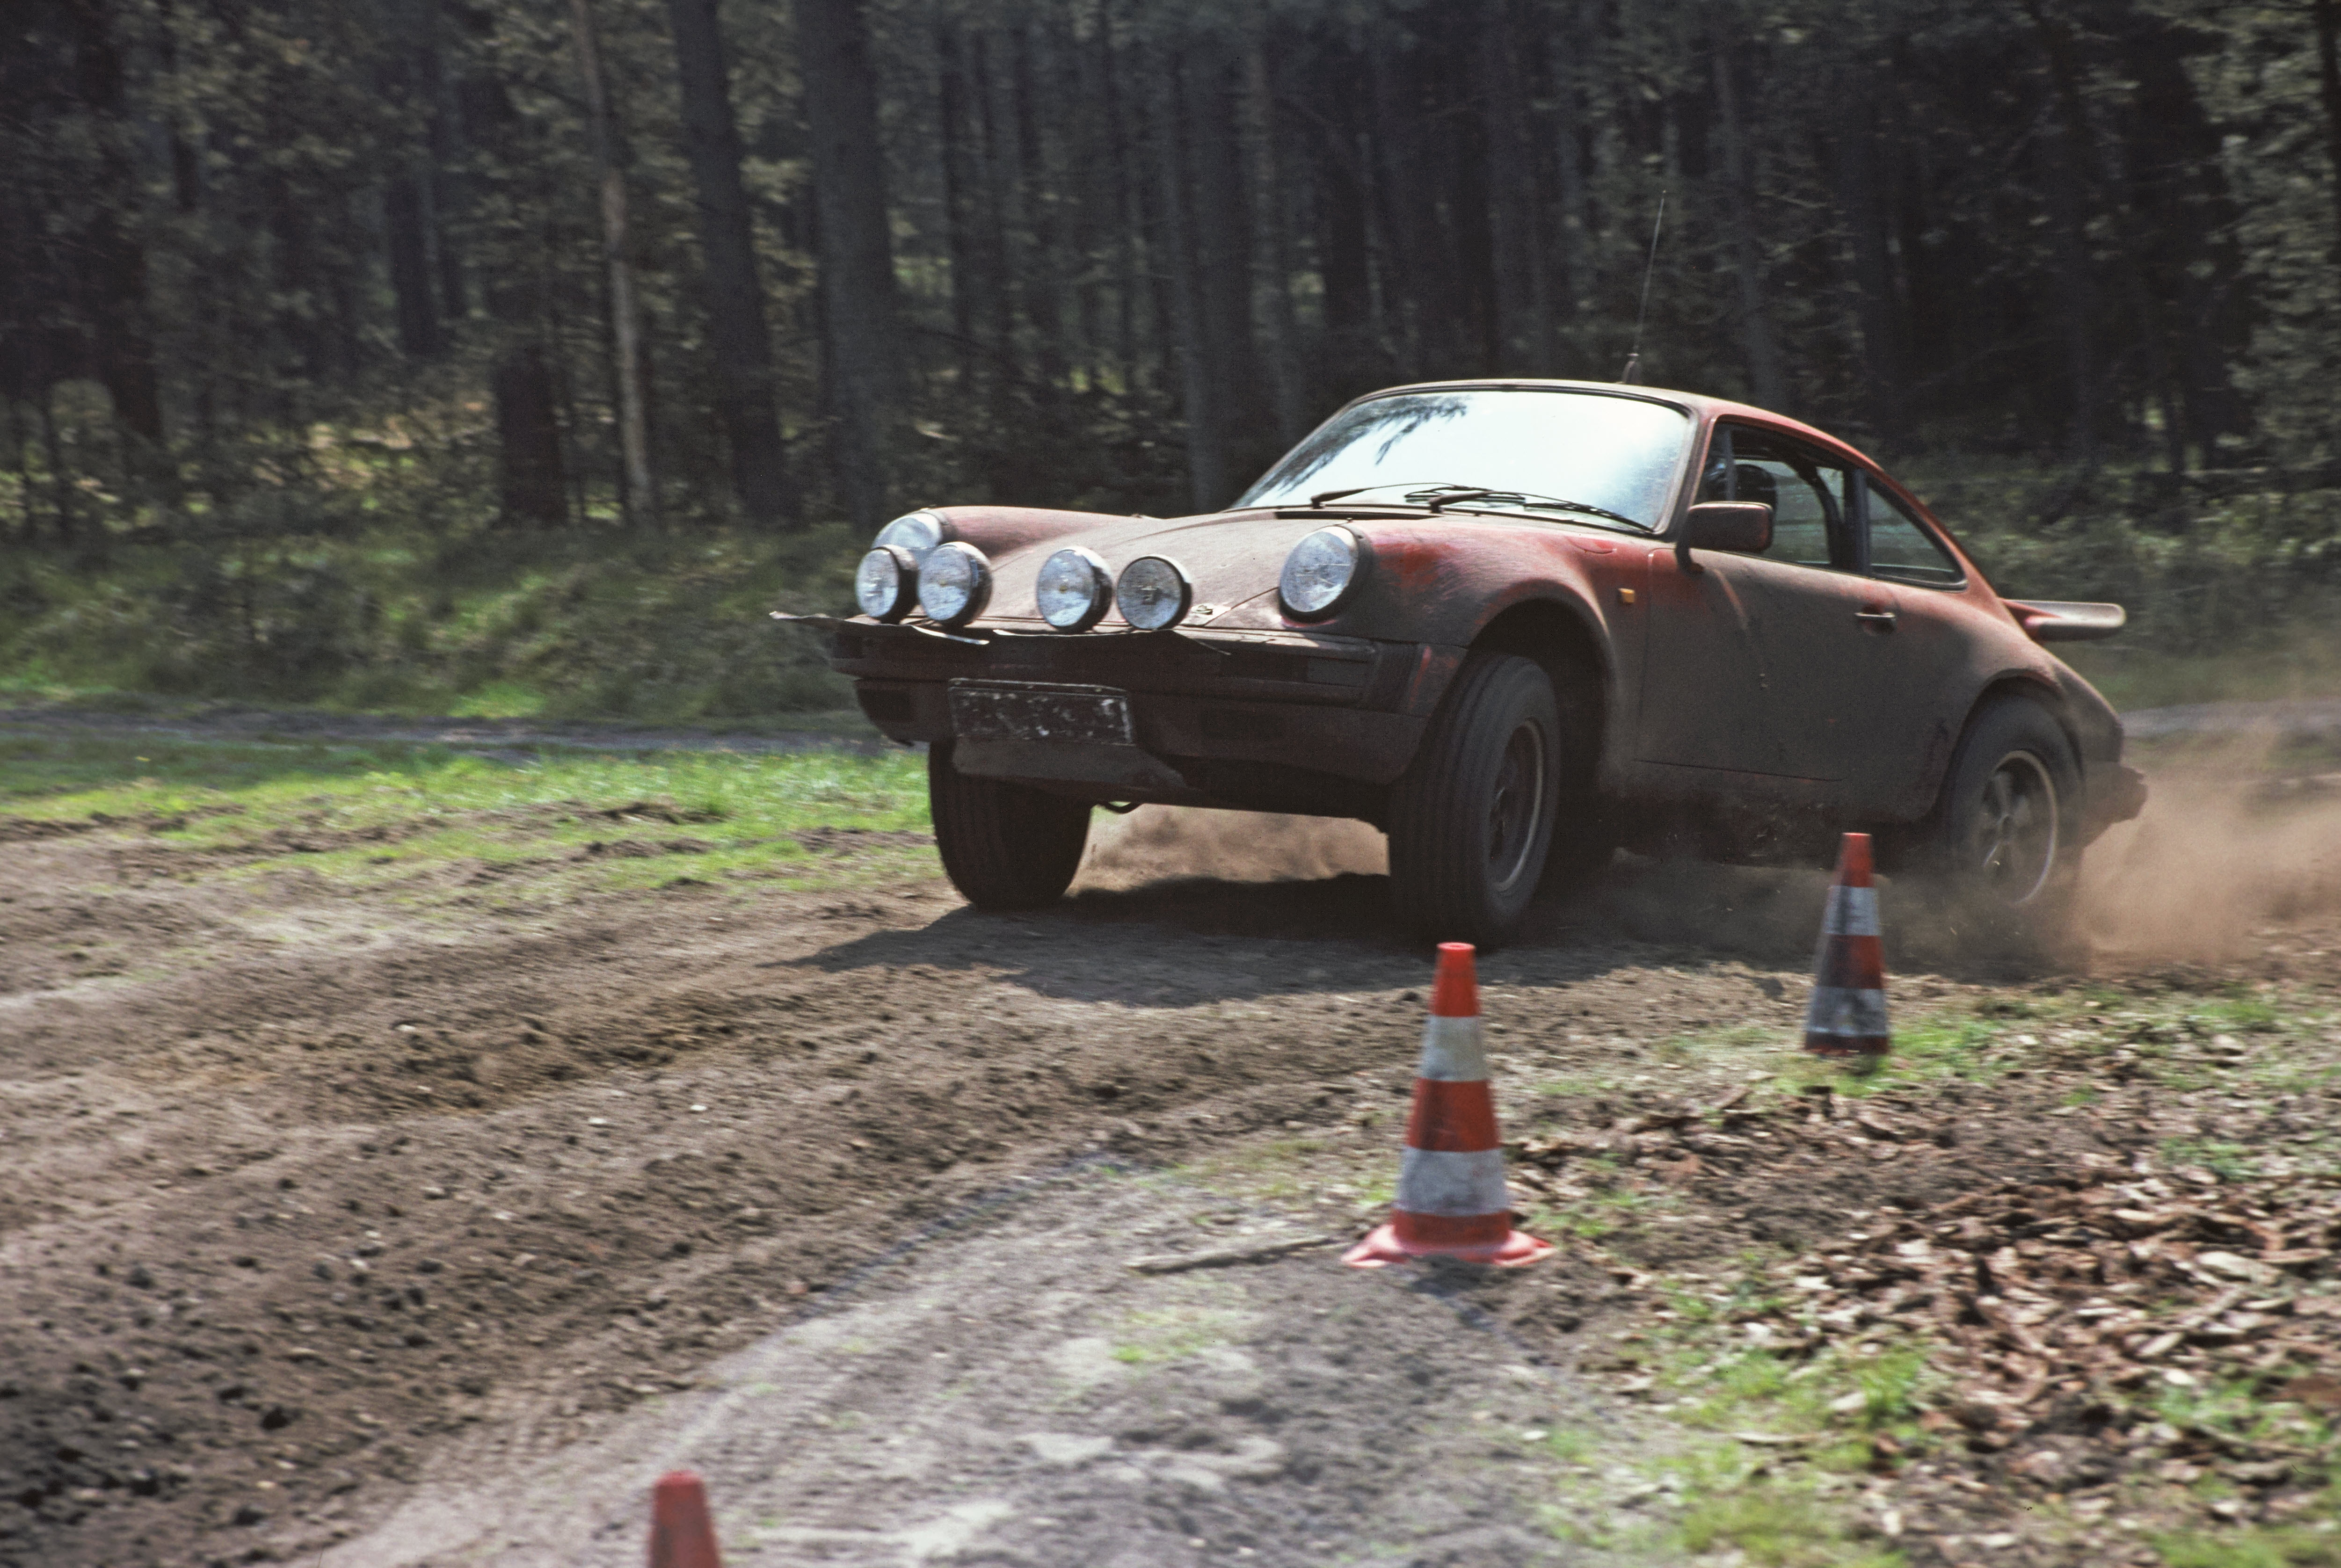 Porsche 911 Carrera prototype being tested in rally conditions